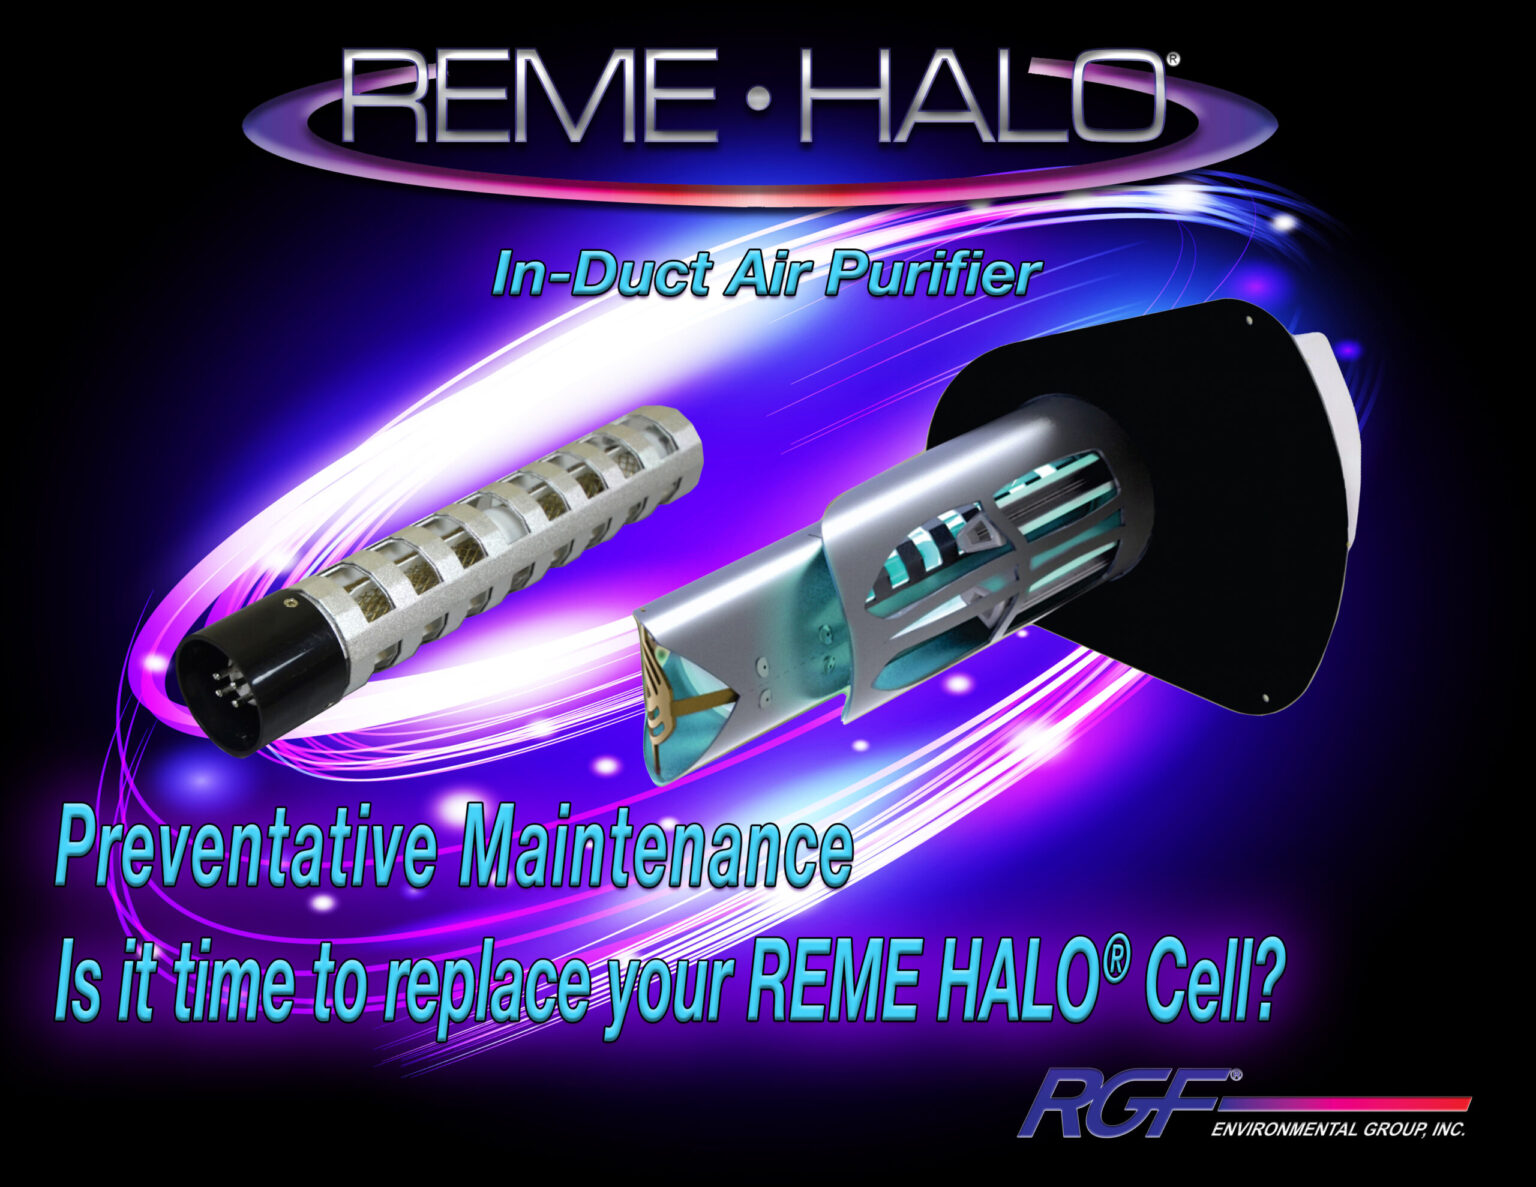 reme halo pros and cons